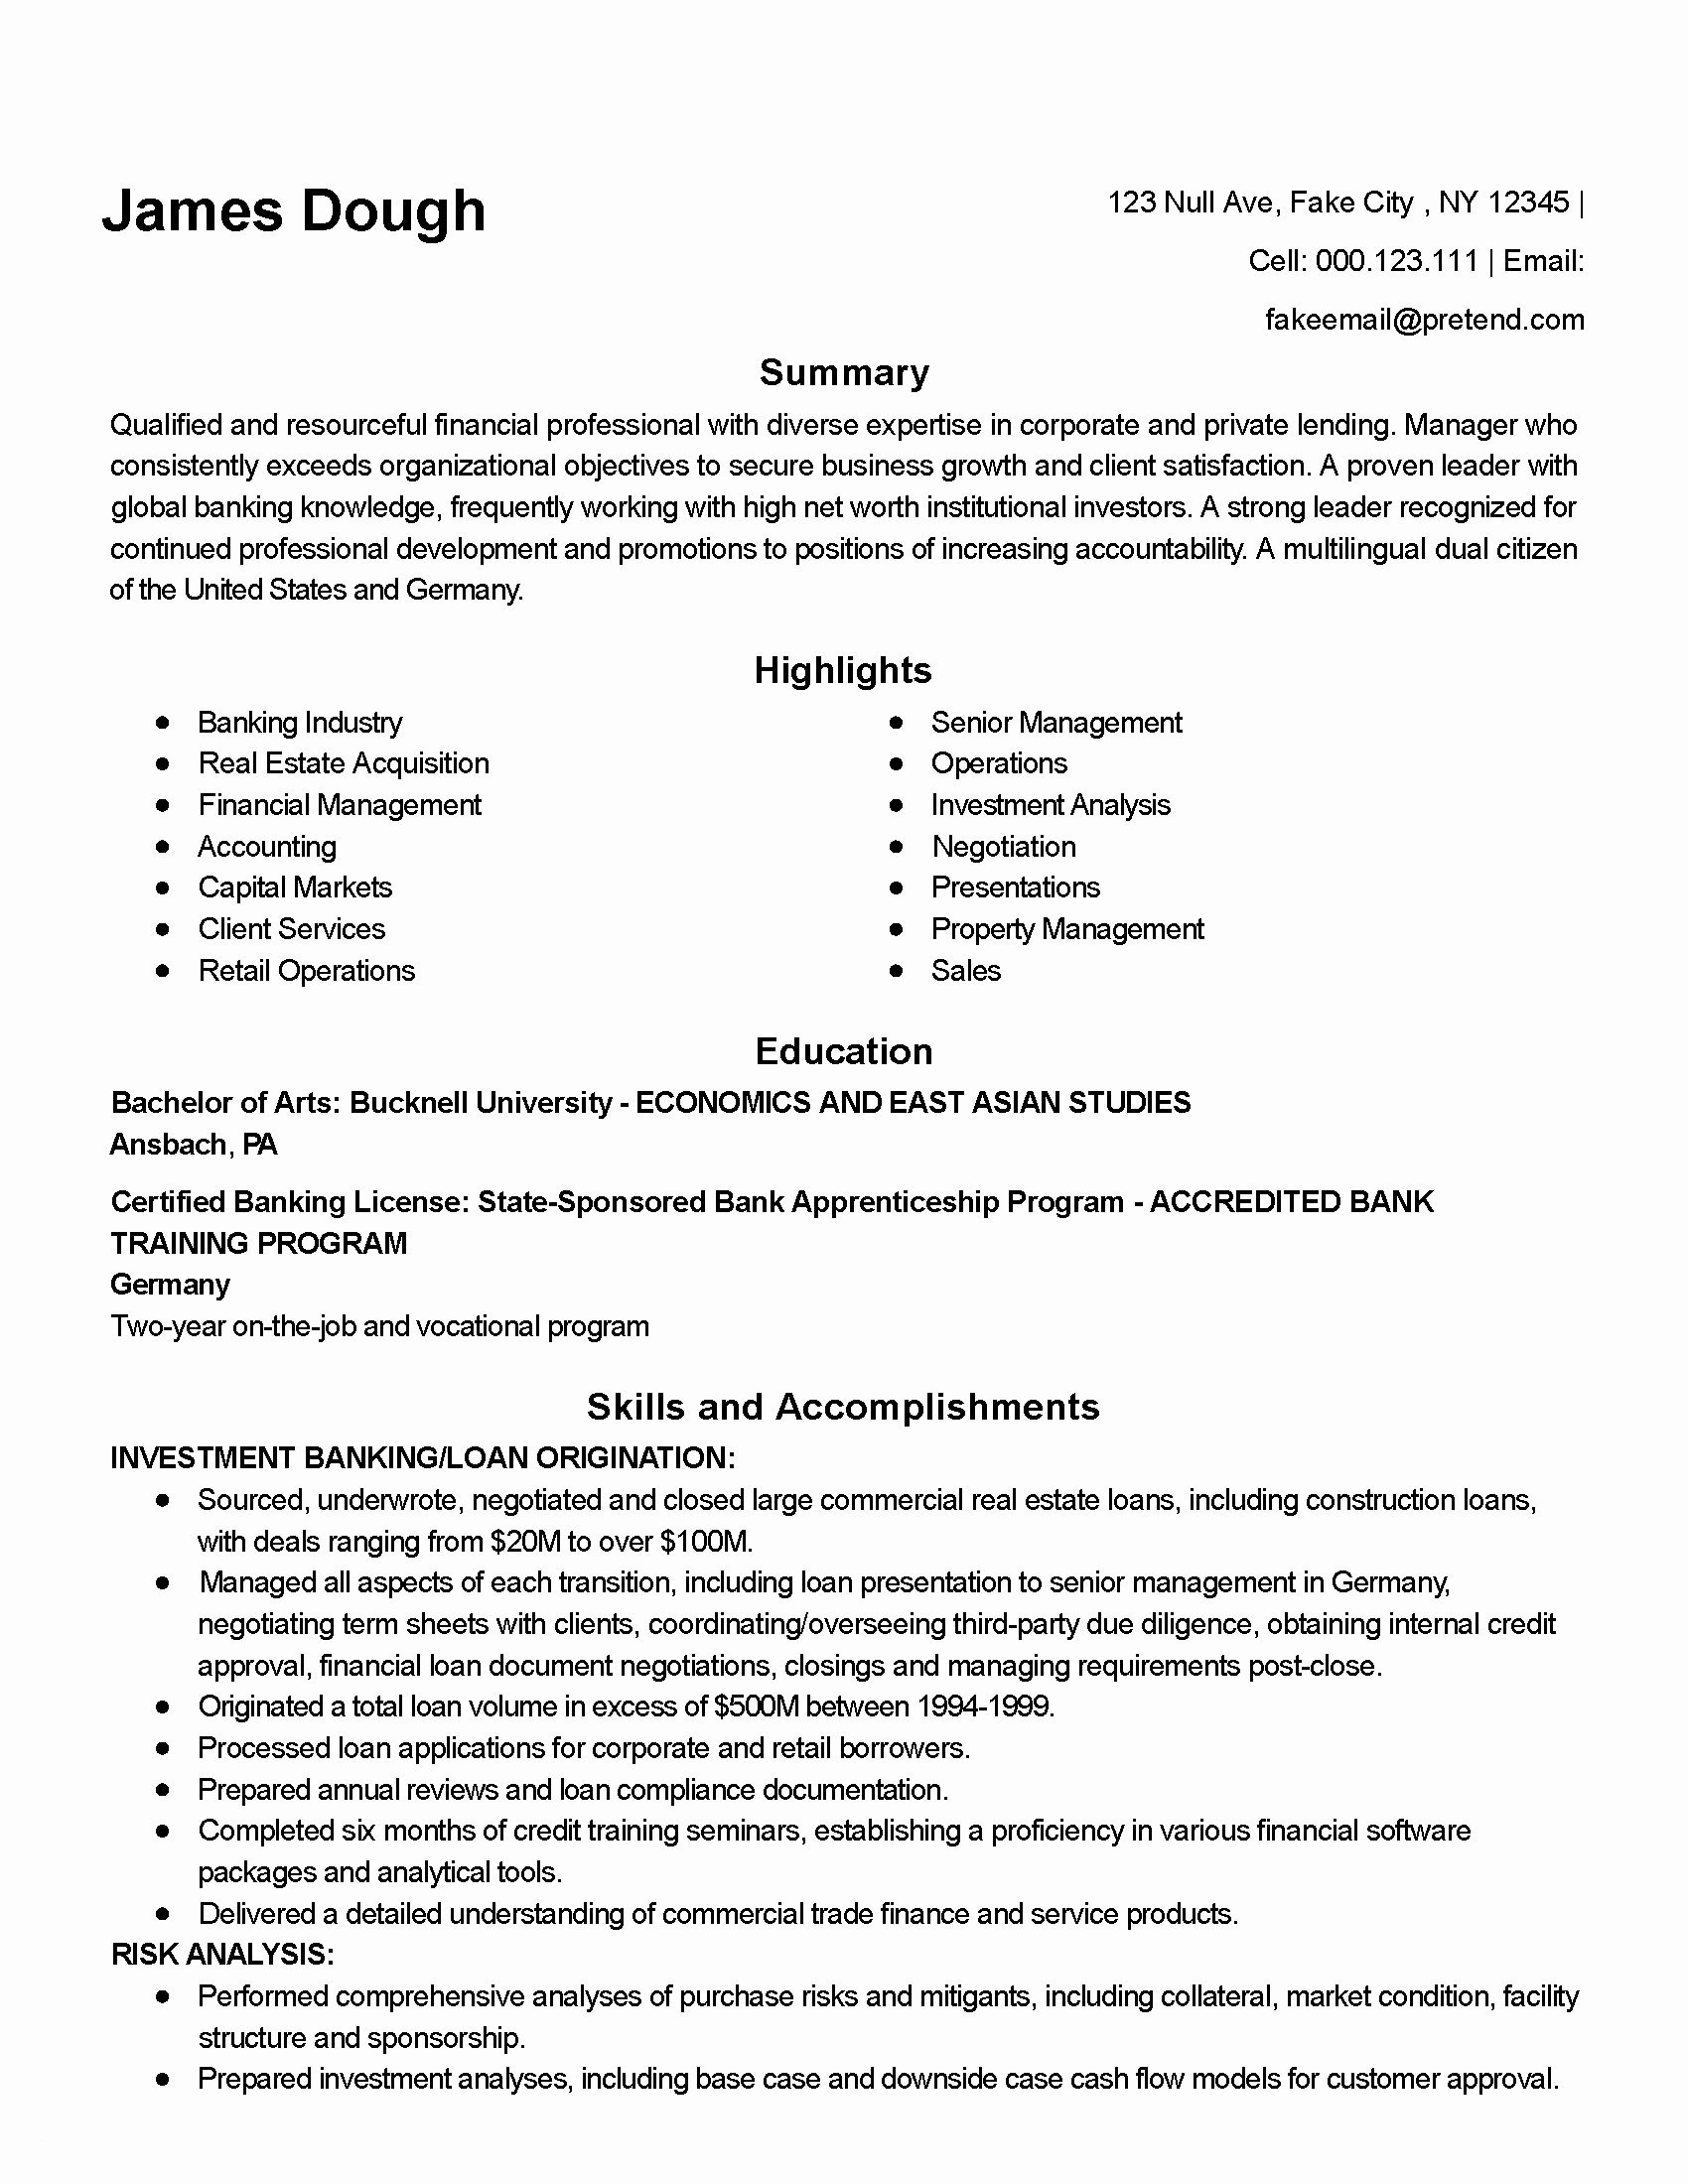 graduate-school-cover-letter-template-examples-letter-template-collection